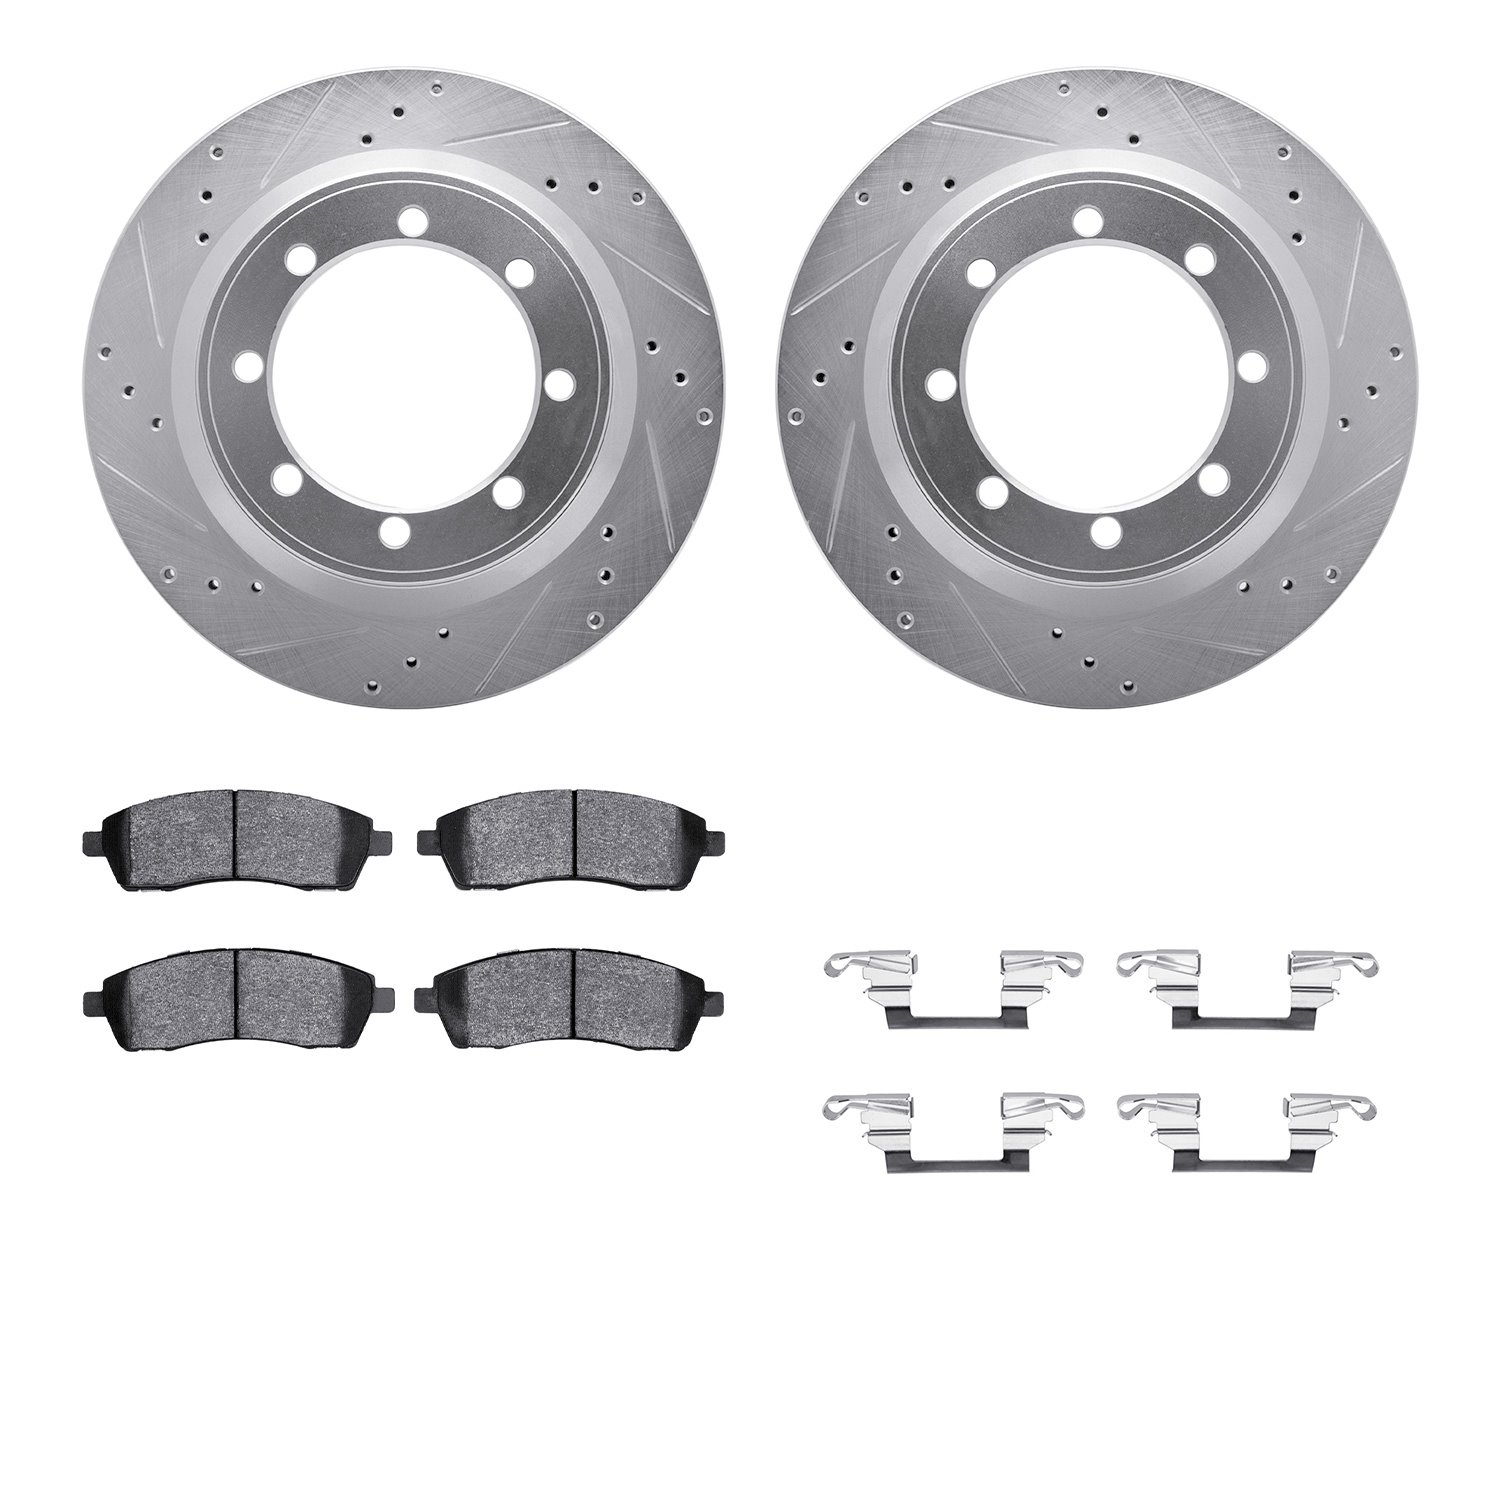 7412-54047 Drilled/Slotted Brake Rotors with Ultimate-Duty Brake Pads Kit & Hardware [Silver], 1999-2004 Ford/Lincoln/Mercury/Ma